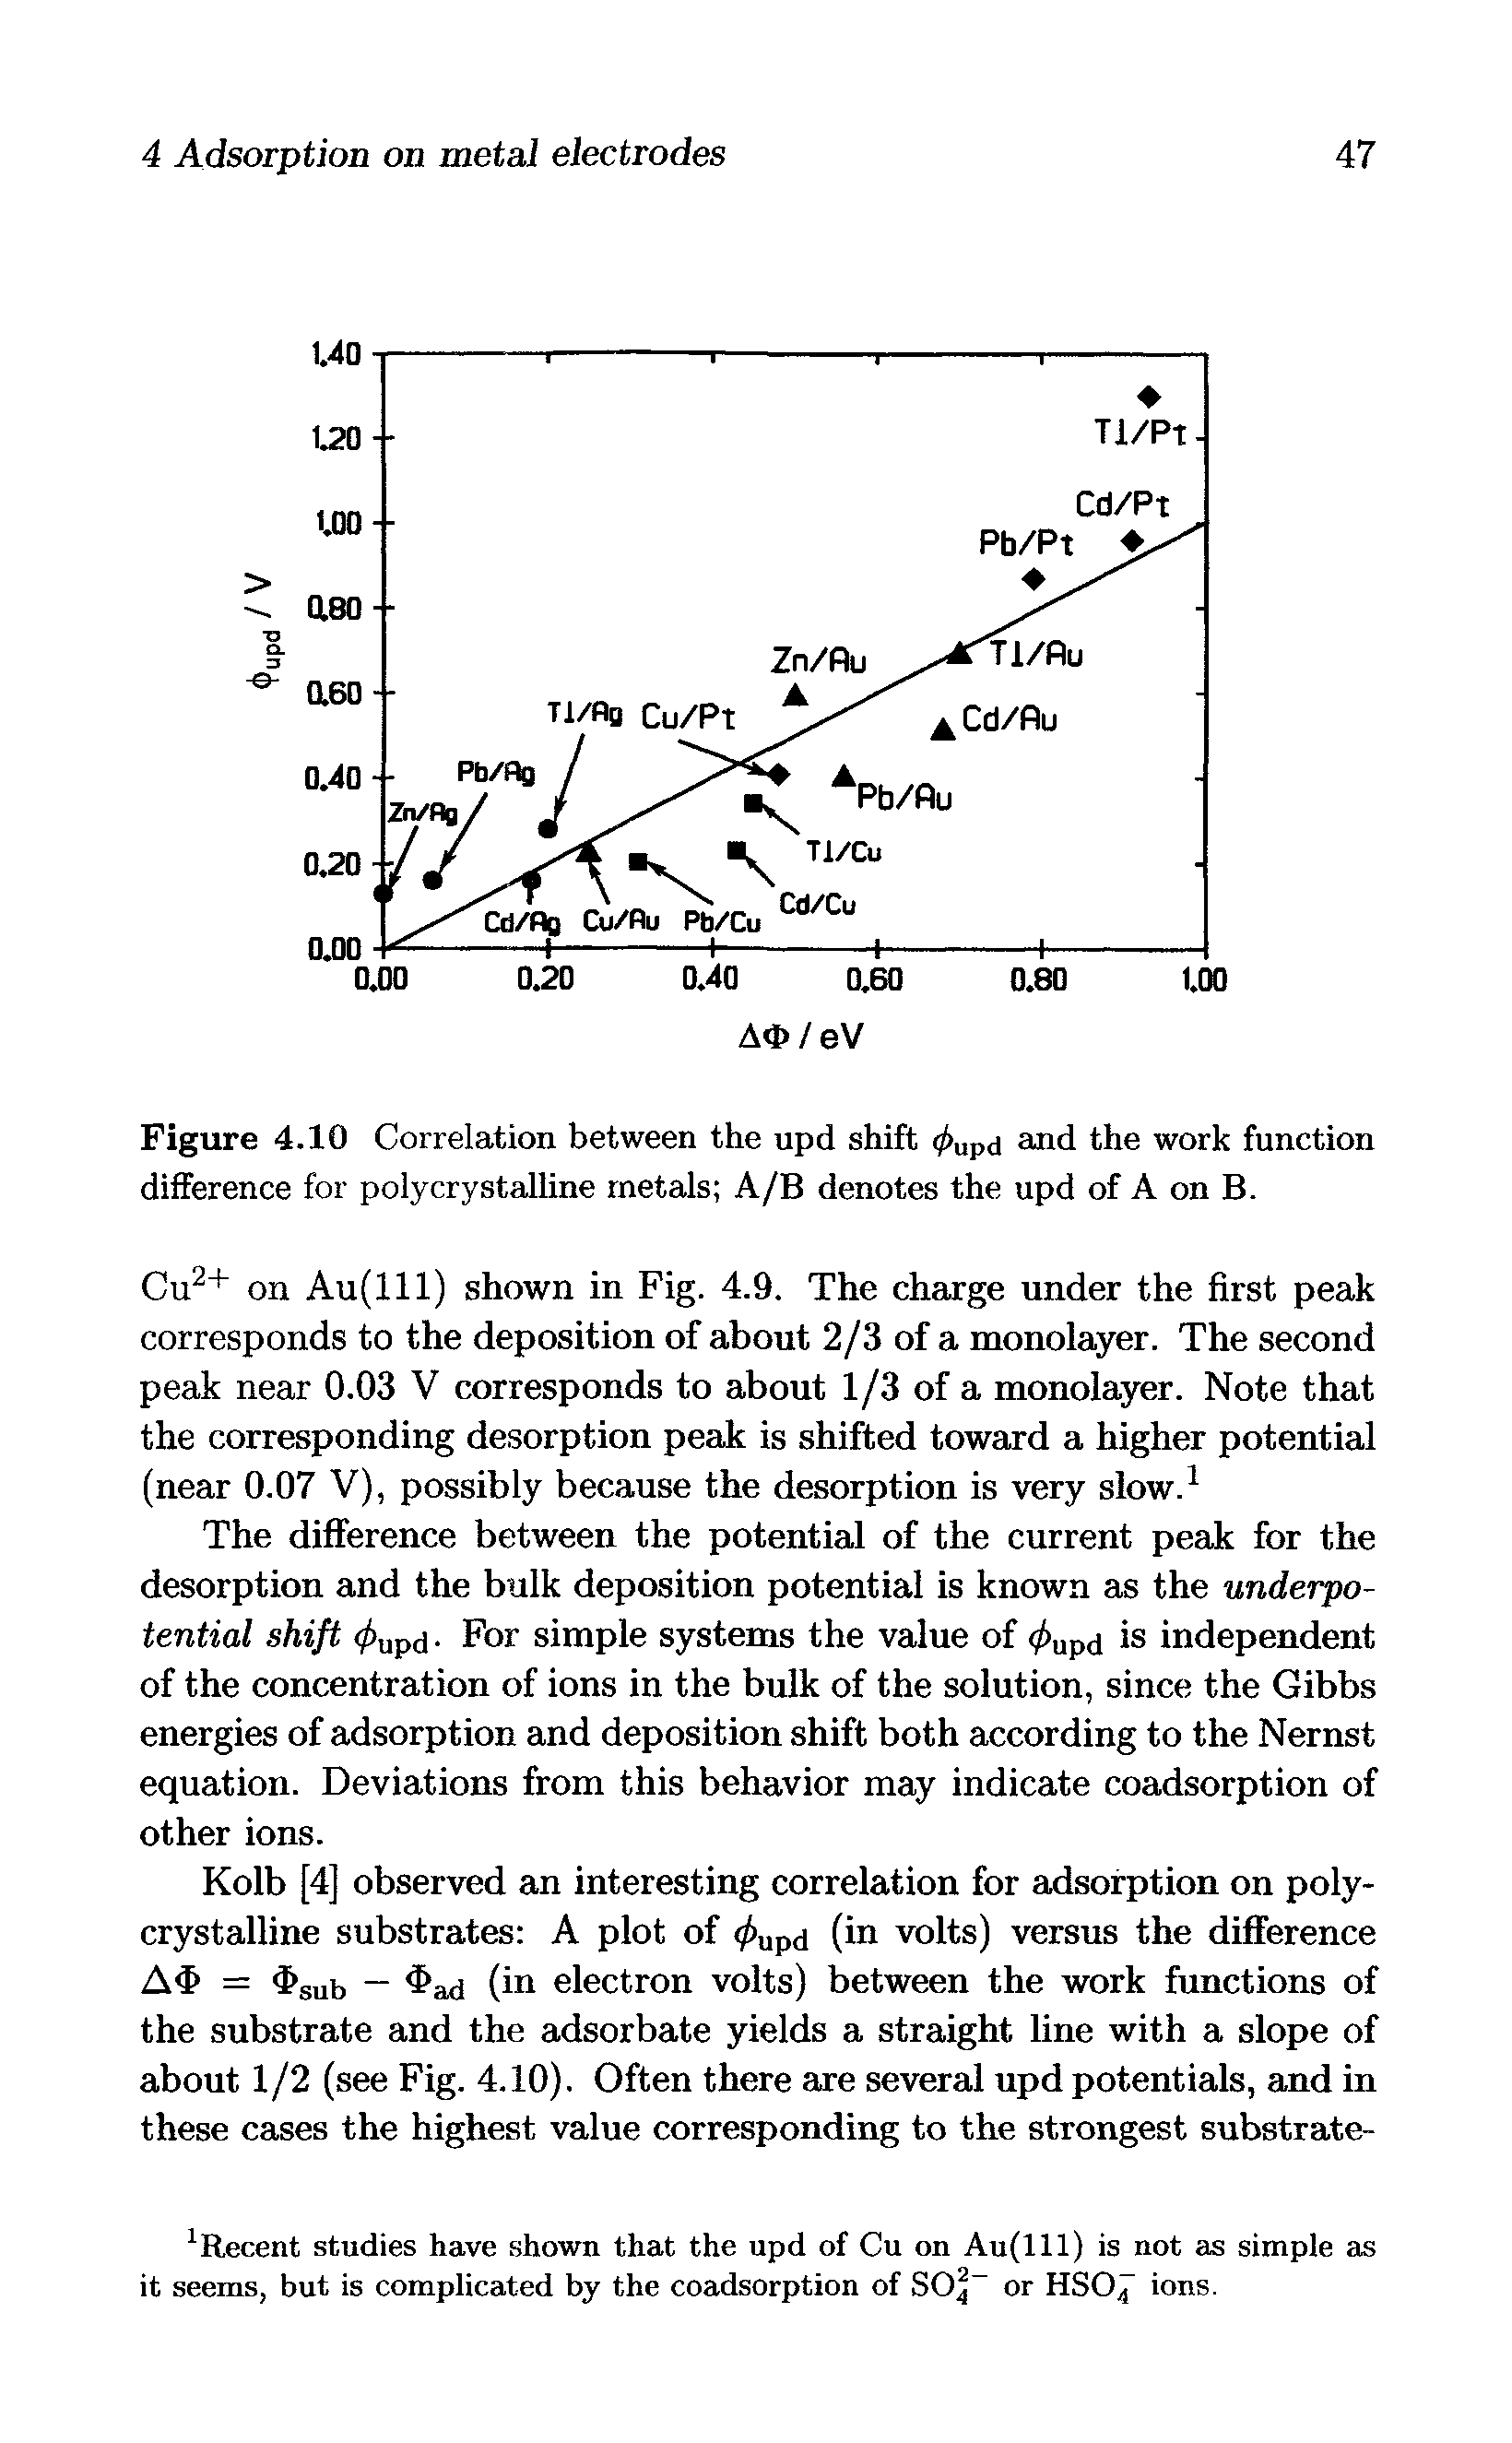 Figure 4.10 Correlation between the upd shift 4>Upd and the work function difference for polycrystalline metals A/B denotes the upd of A on B.